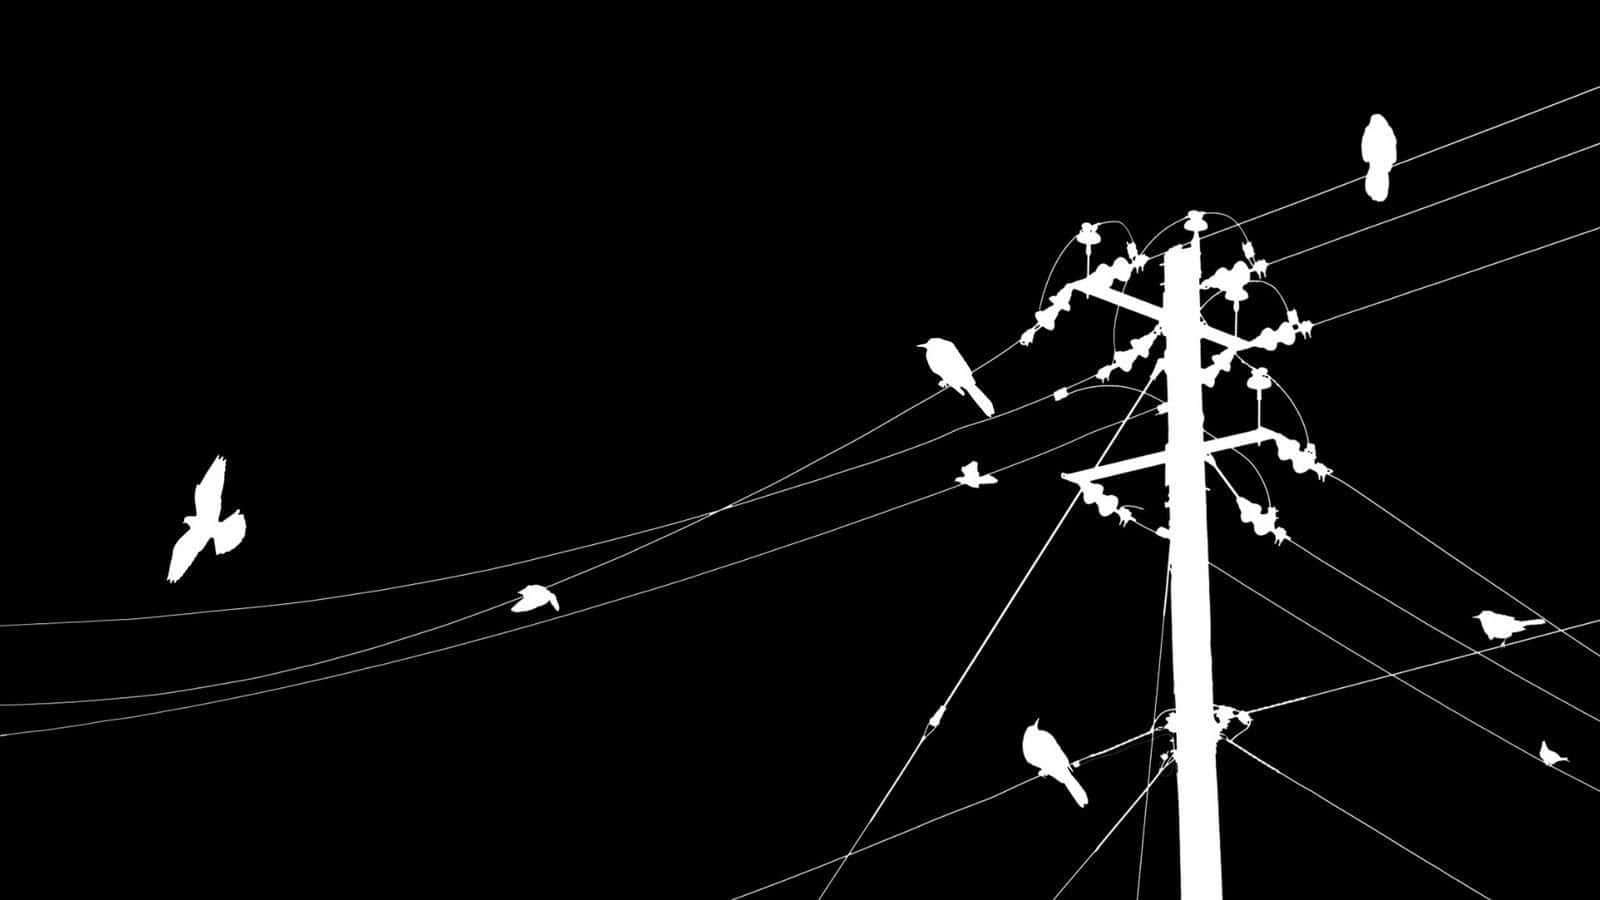 A Black And White Image Of Birds Perched On A Power Pole